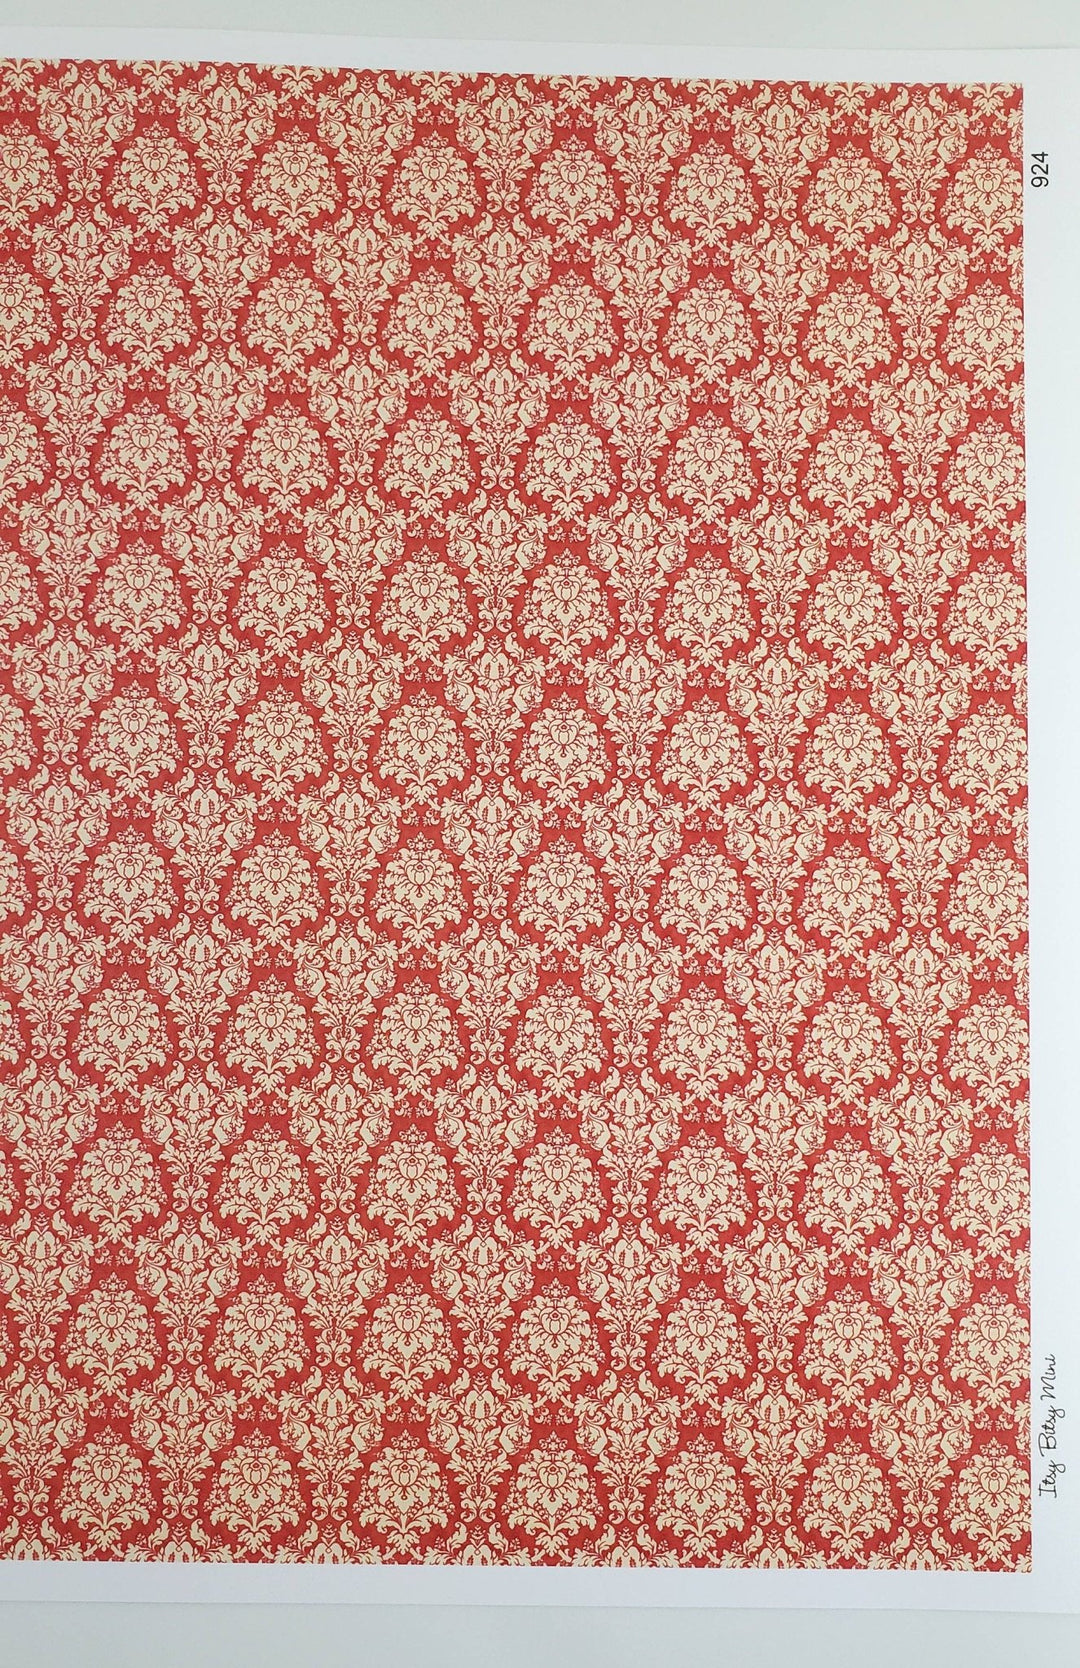 Dollhouse Wallpaper Damask Red/Coral & Cream Victorian 1:12 Scale Itsy Bitsy Miniatures - Miniature Crush